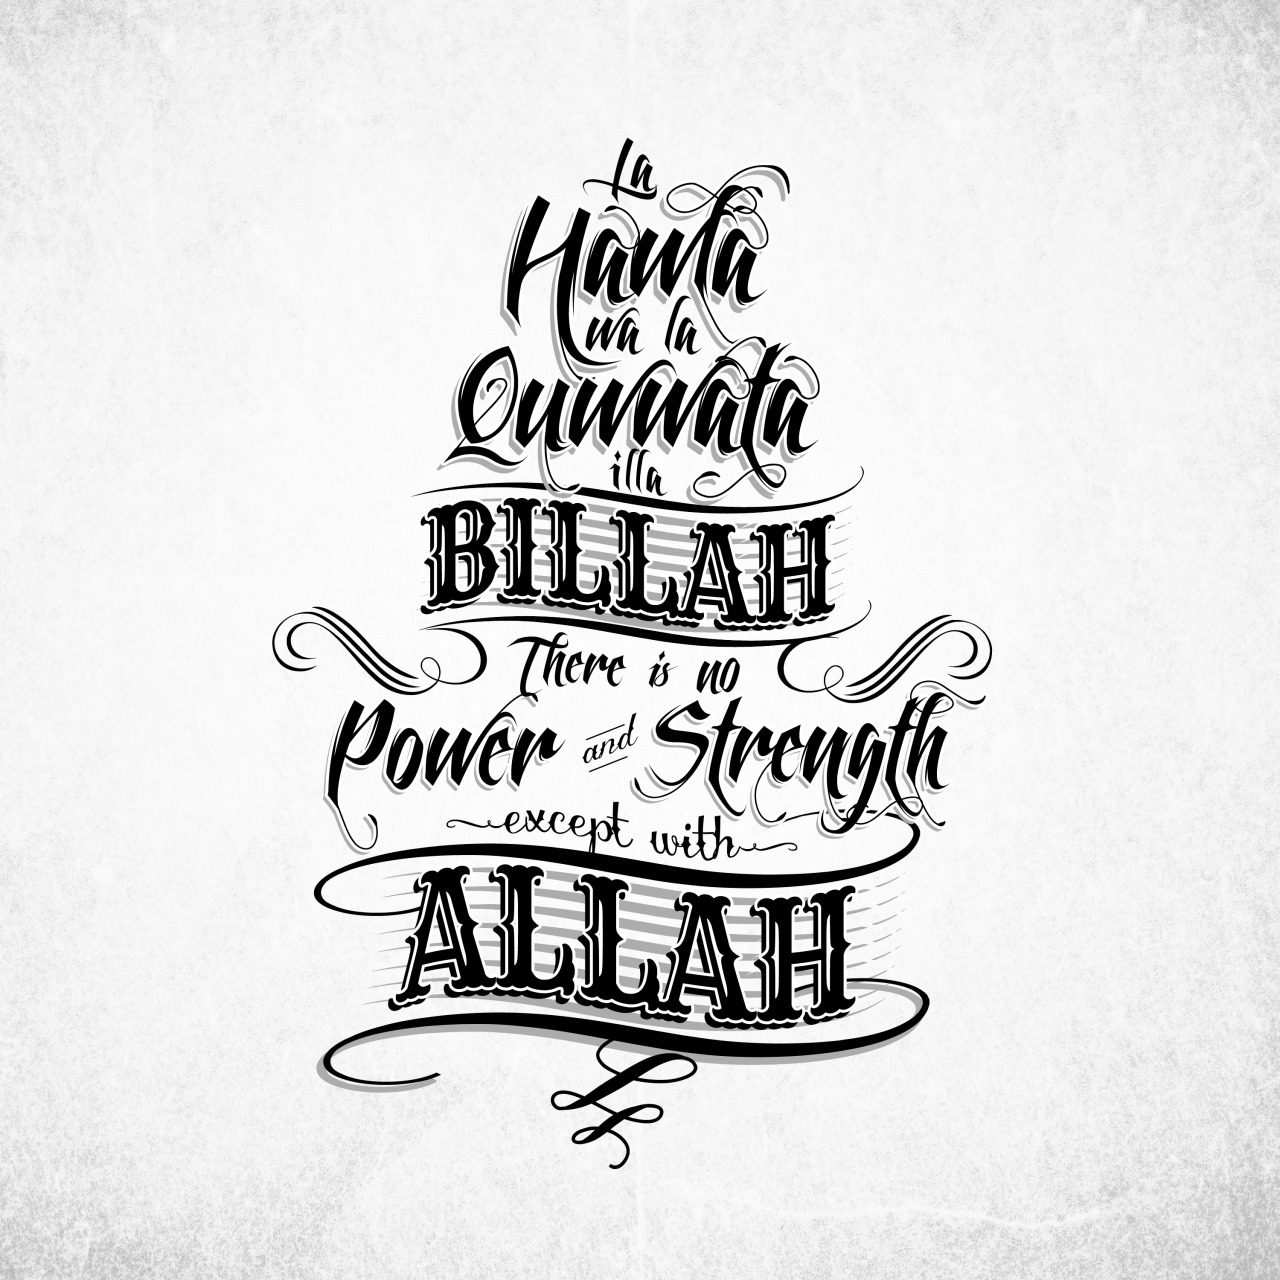 There is no power and strength except with Allah - Inspirational ...